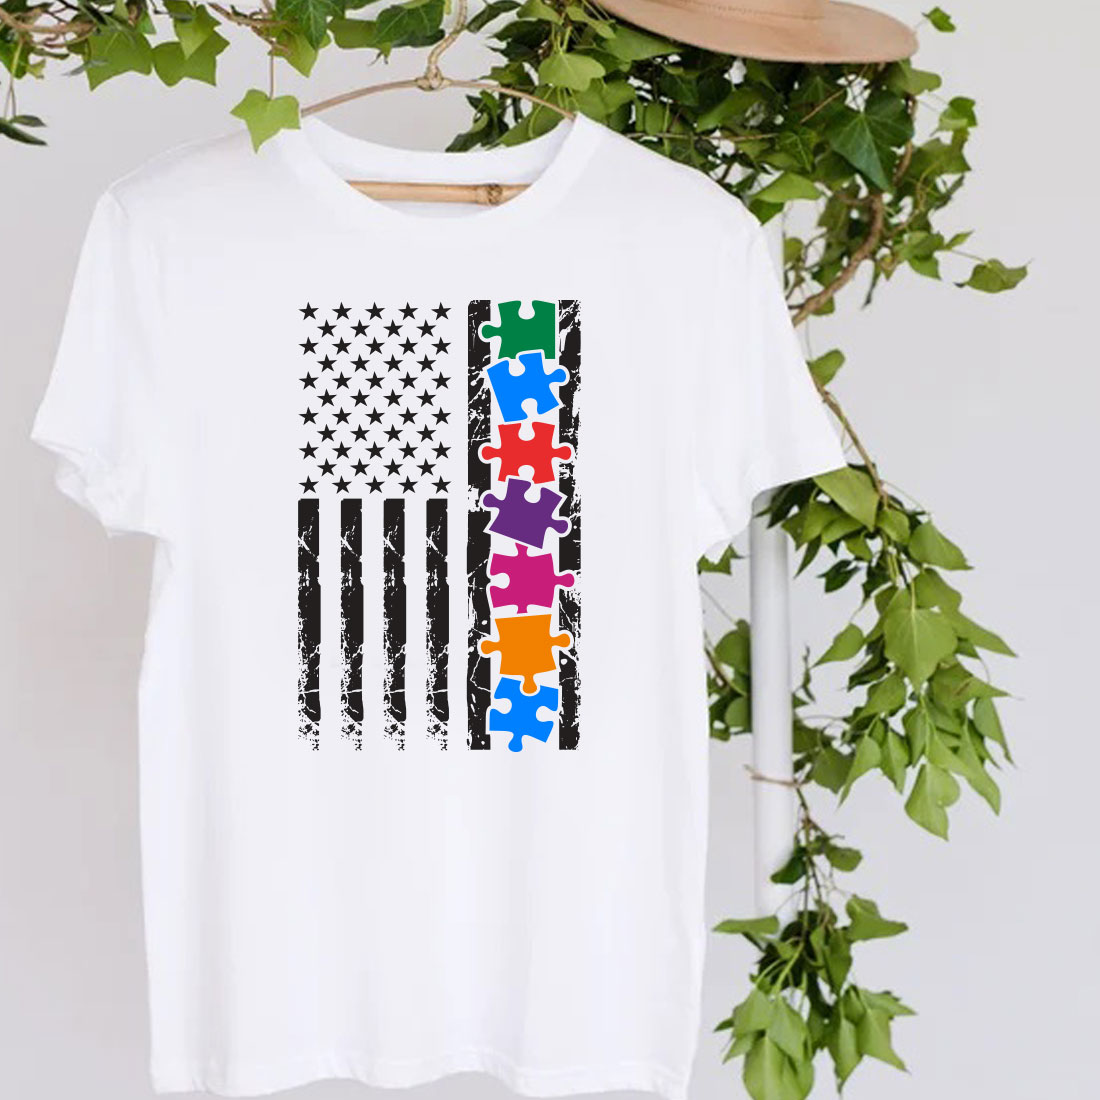 White t - shirt with a puzzle piece on it.